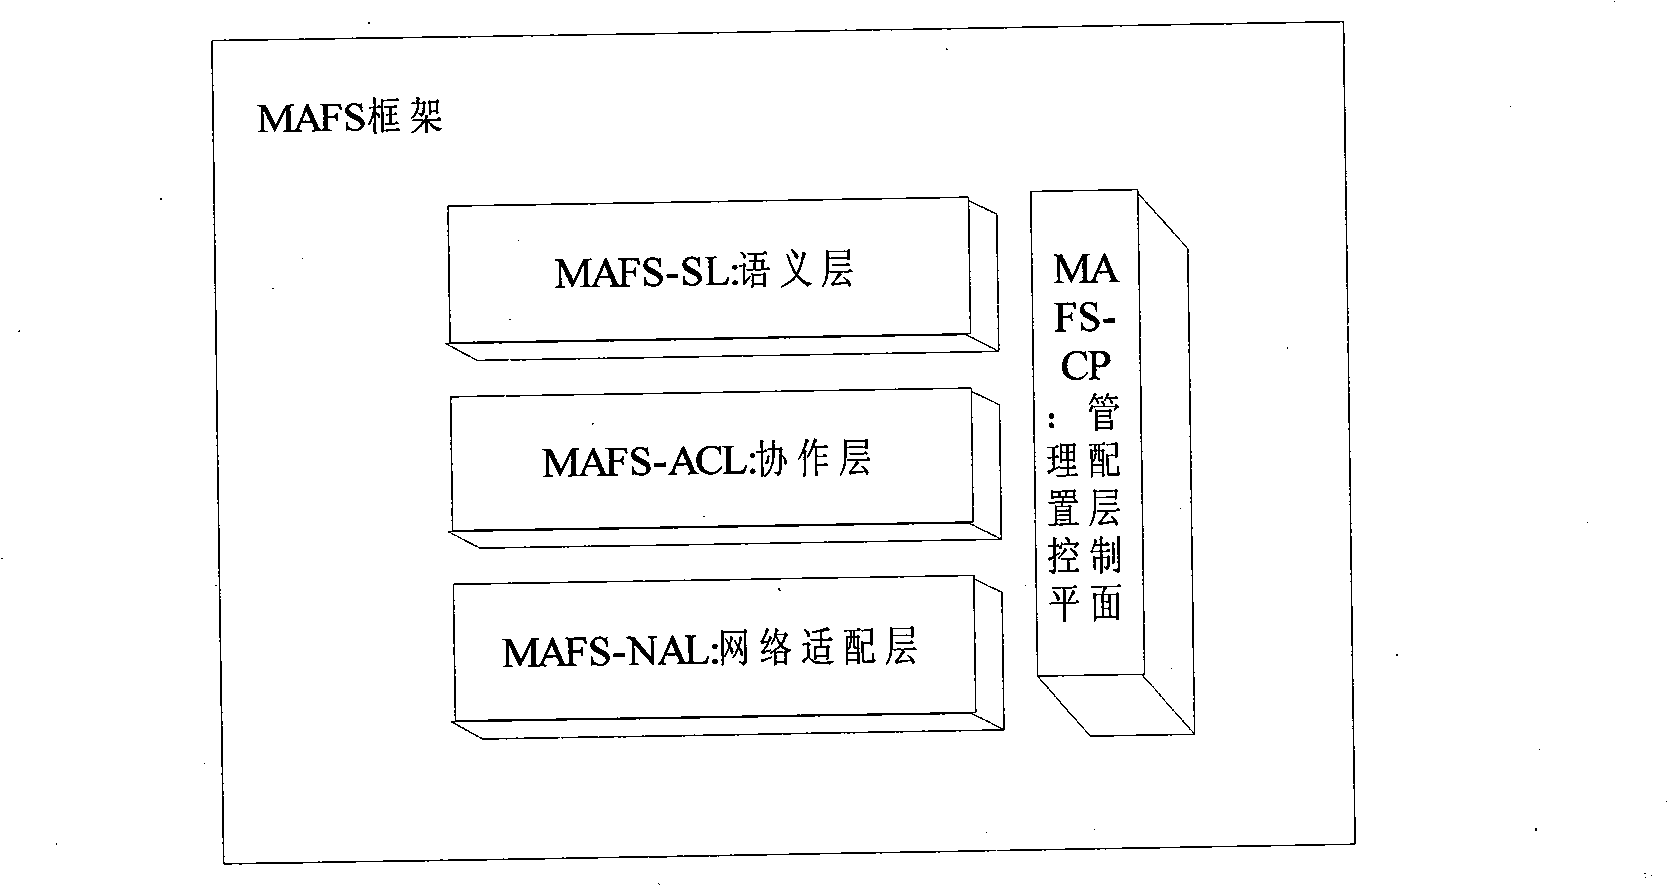 Method of video multiple target detection and tracking based on multi-agent MAFS